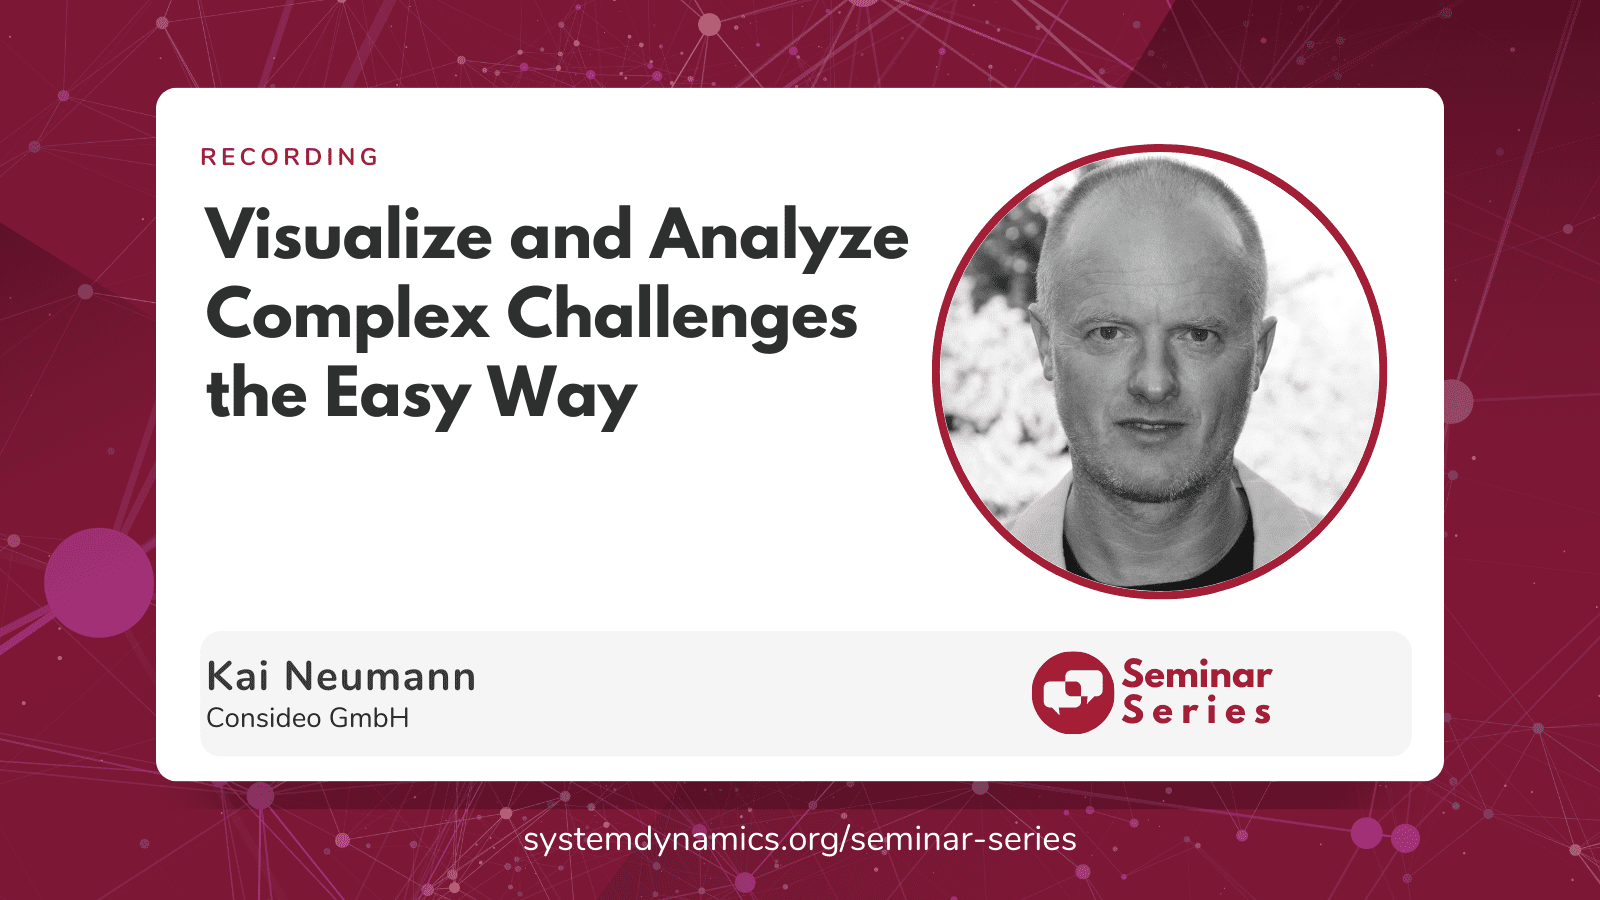 Recording: Workshop Visualize and Analyze Complex Challenges the Easy Way